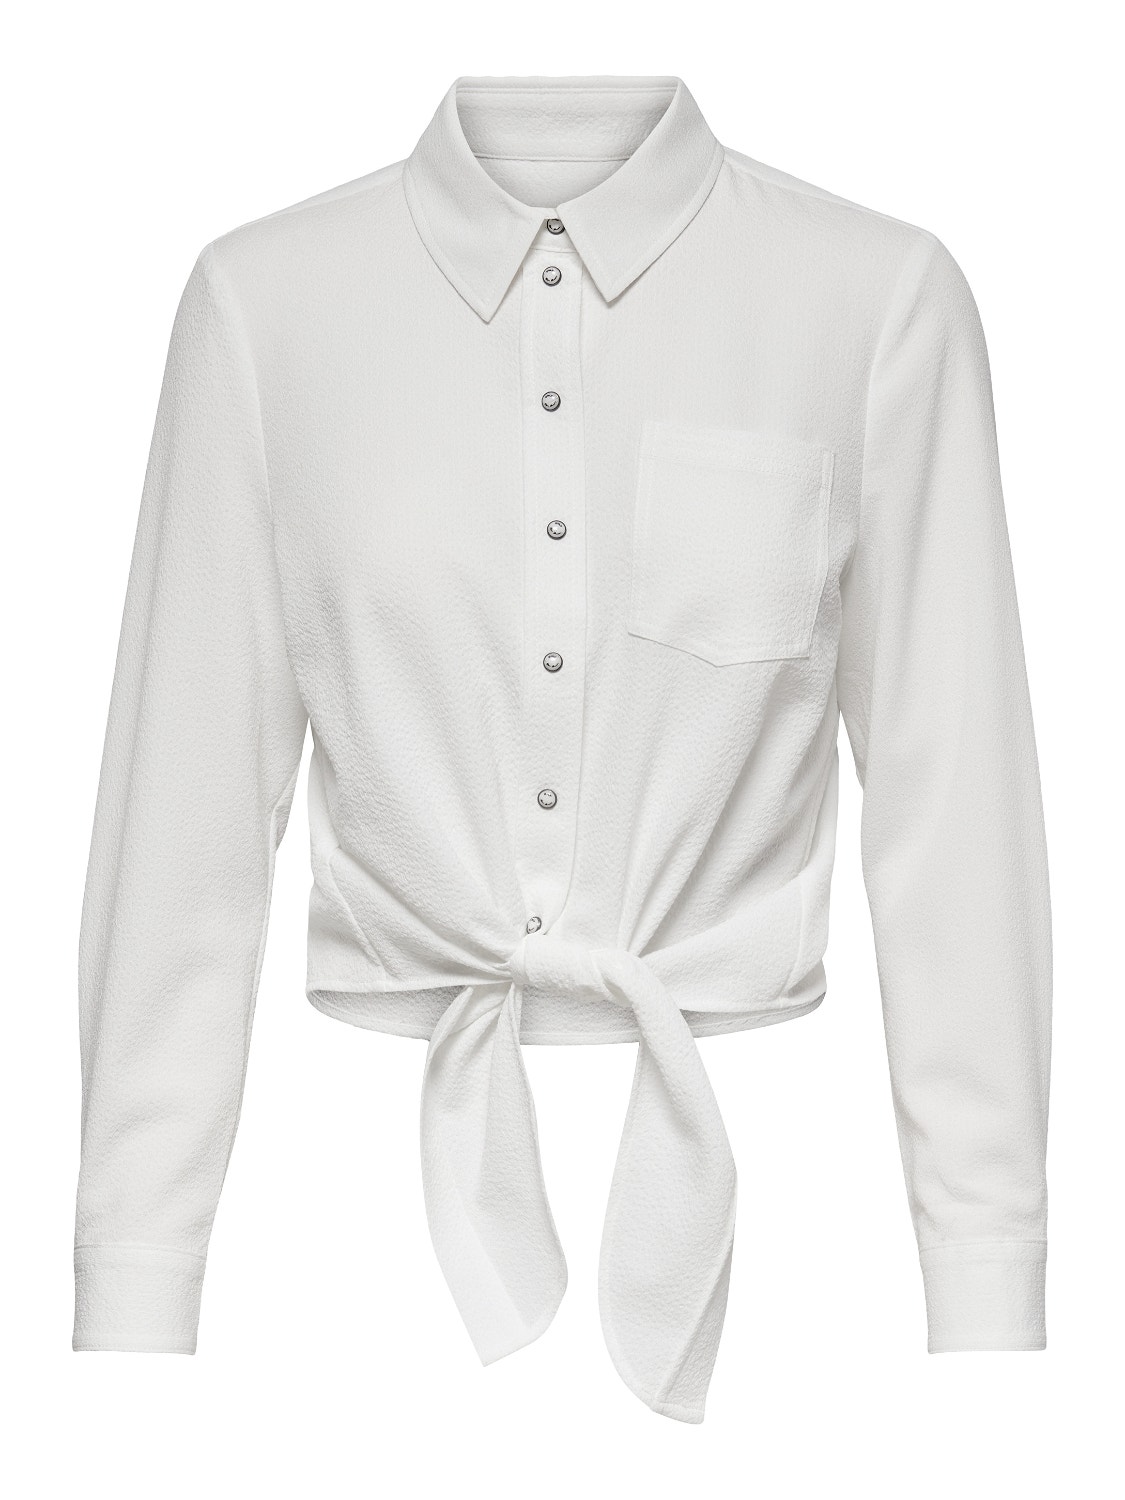 | detail Tie ONLY® | Shirt White